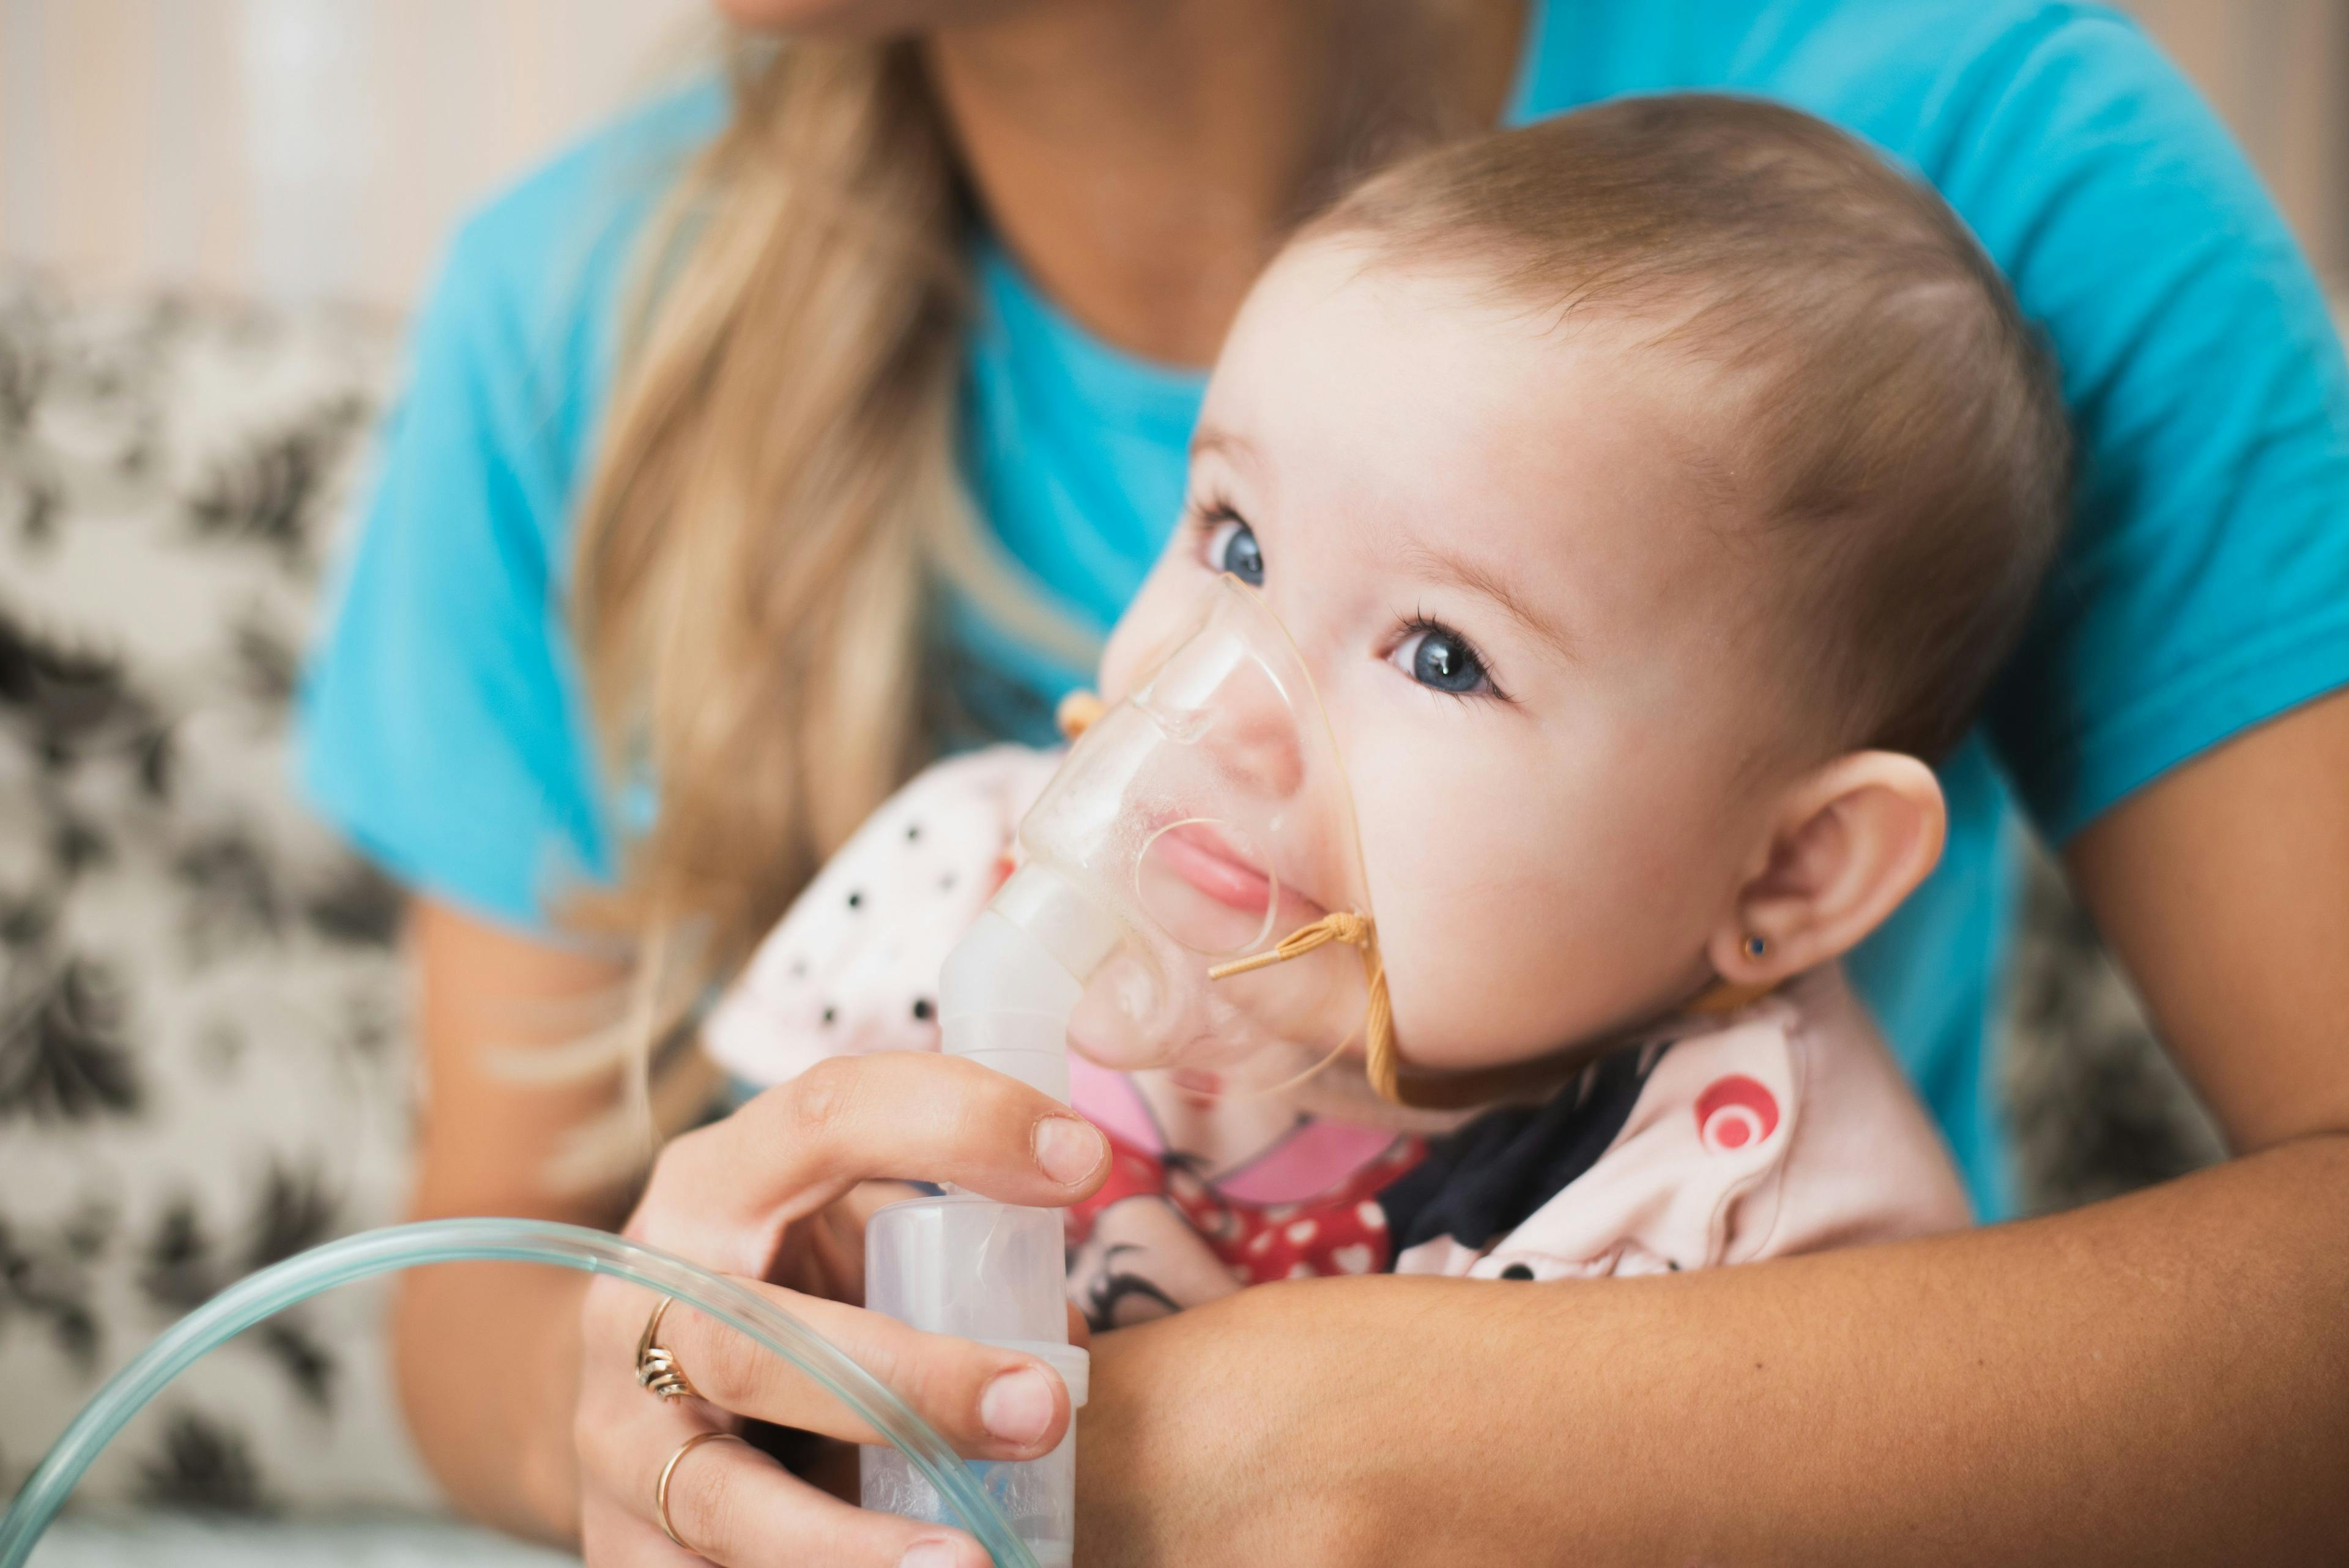 Nirsevimab Significantly Reduces RSV-Induced Lower Respiratory Tract Infections in Infants